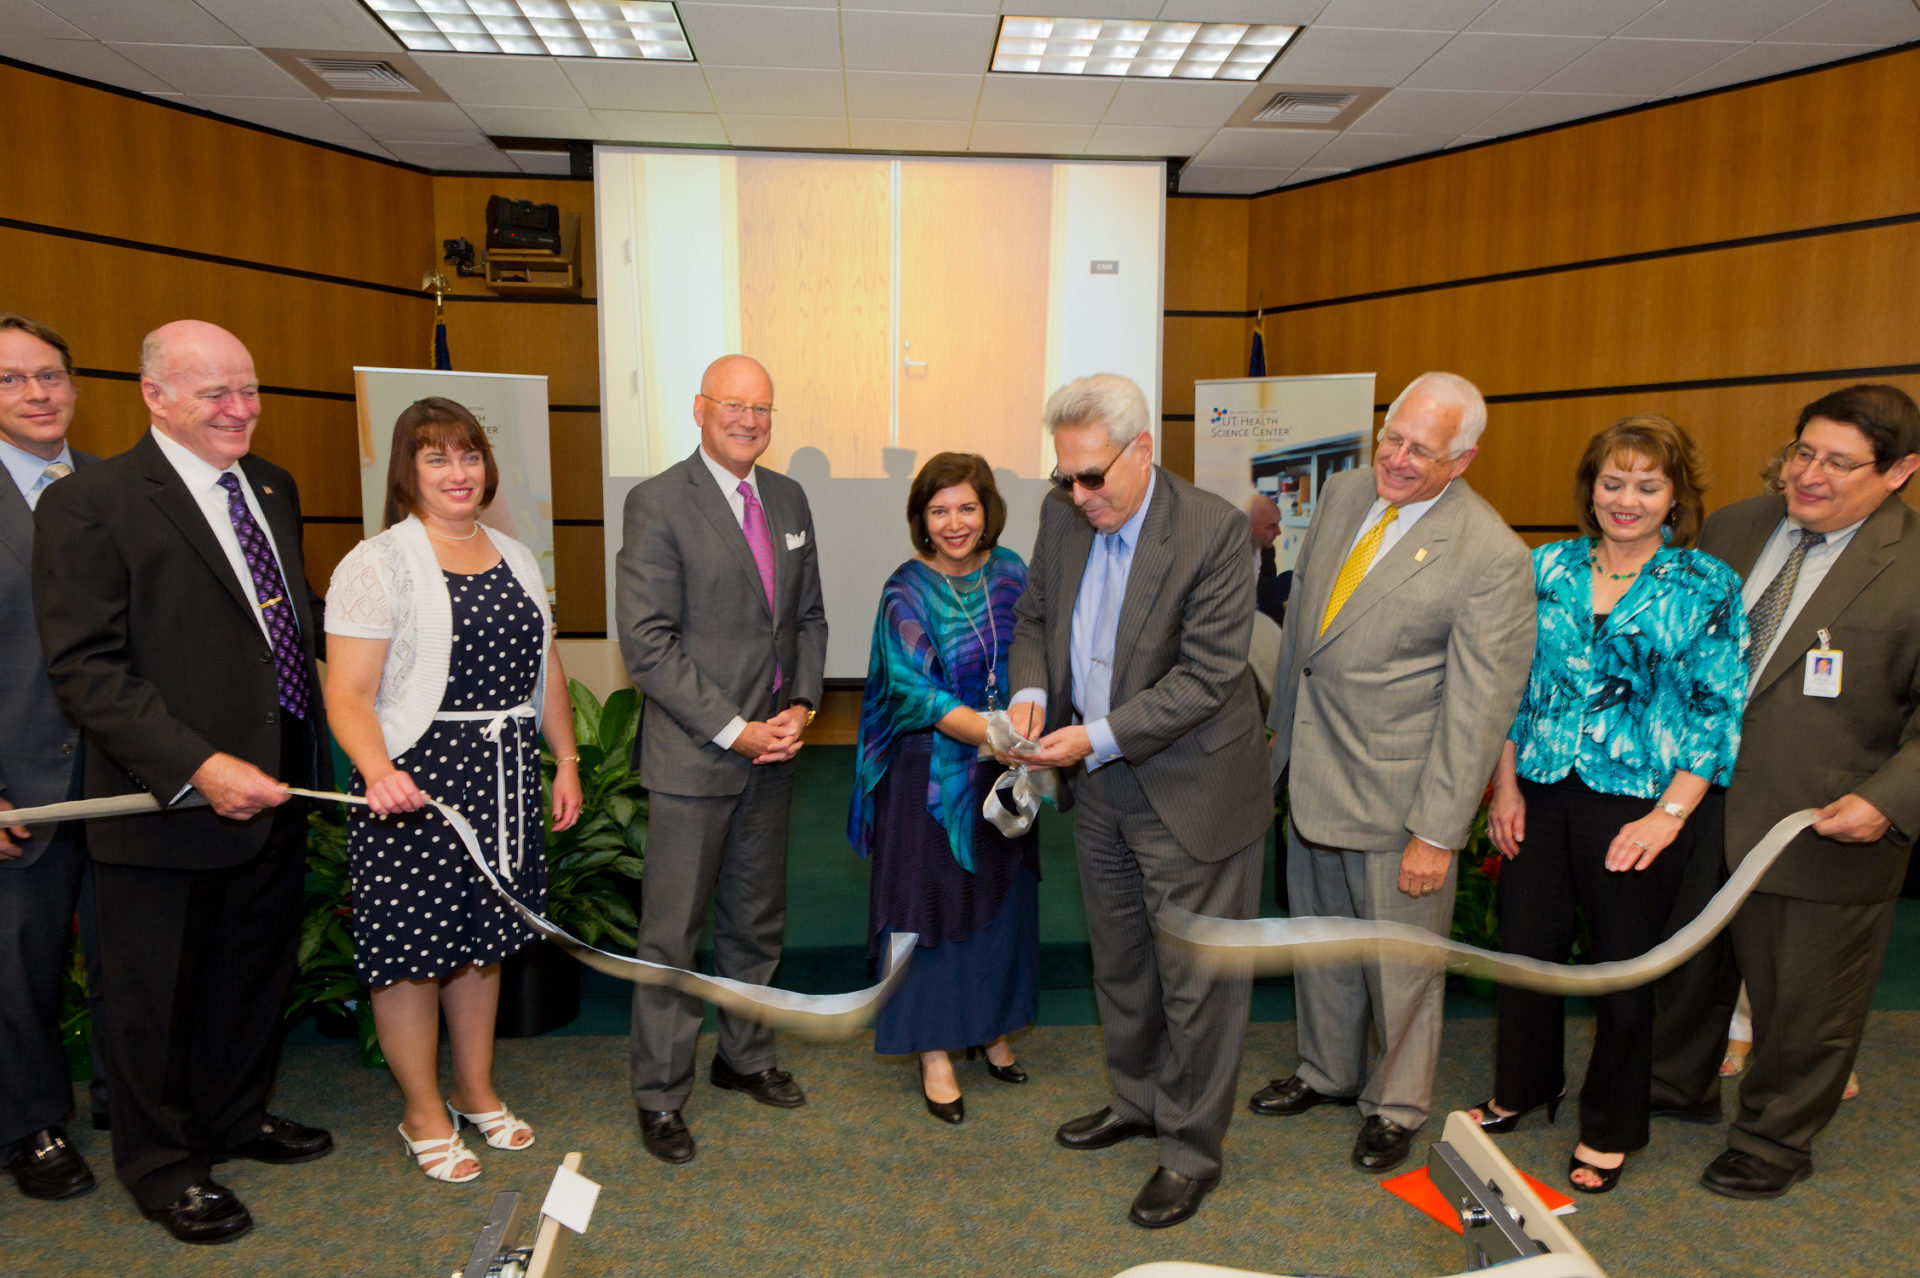 ribbon cutting ceremony celebrates the opening of the $3.8 million Center for Simulation Innovation